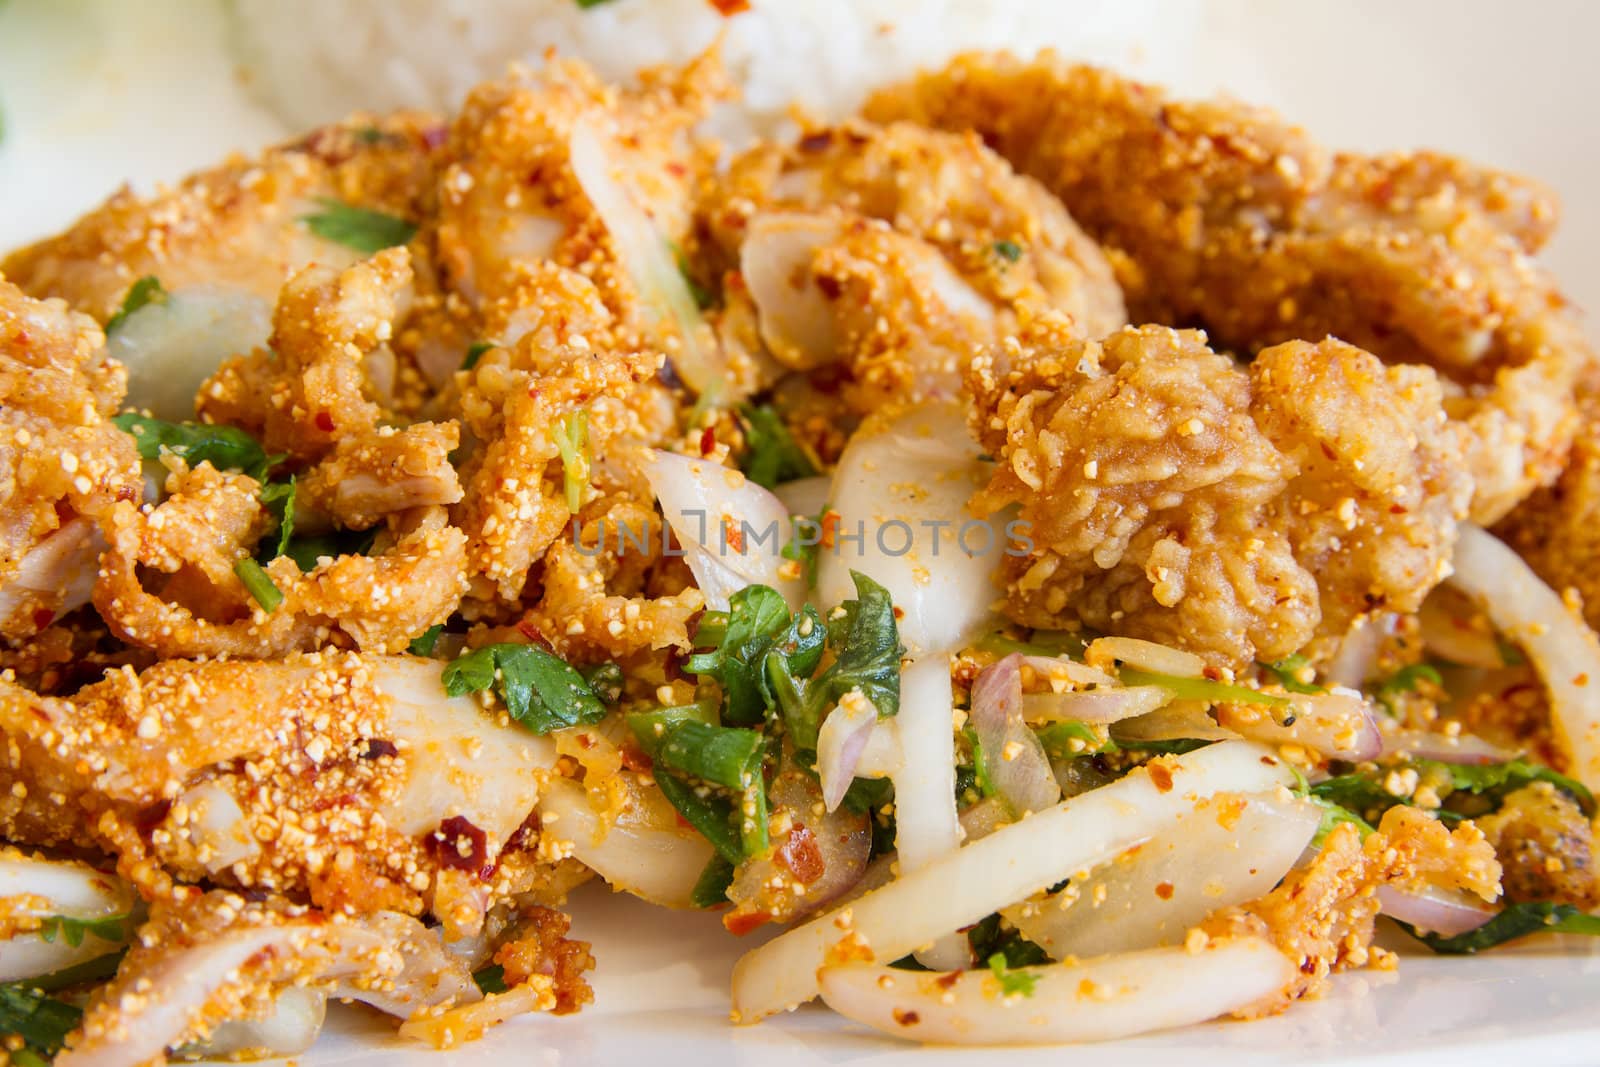 Thai style mixed fried chicken